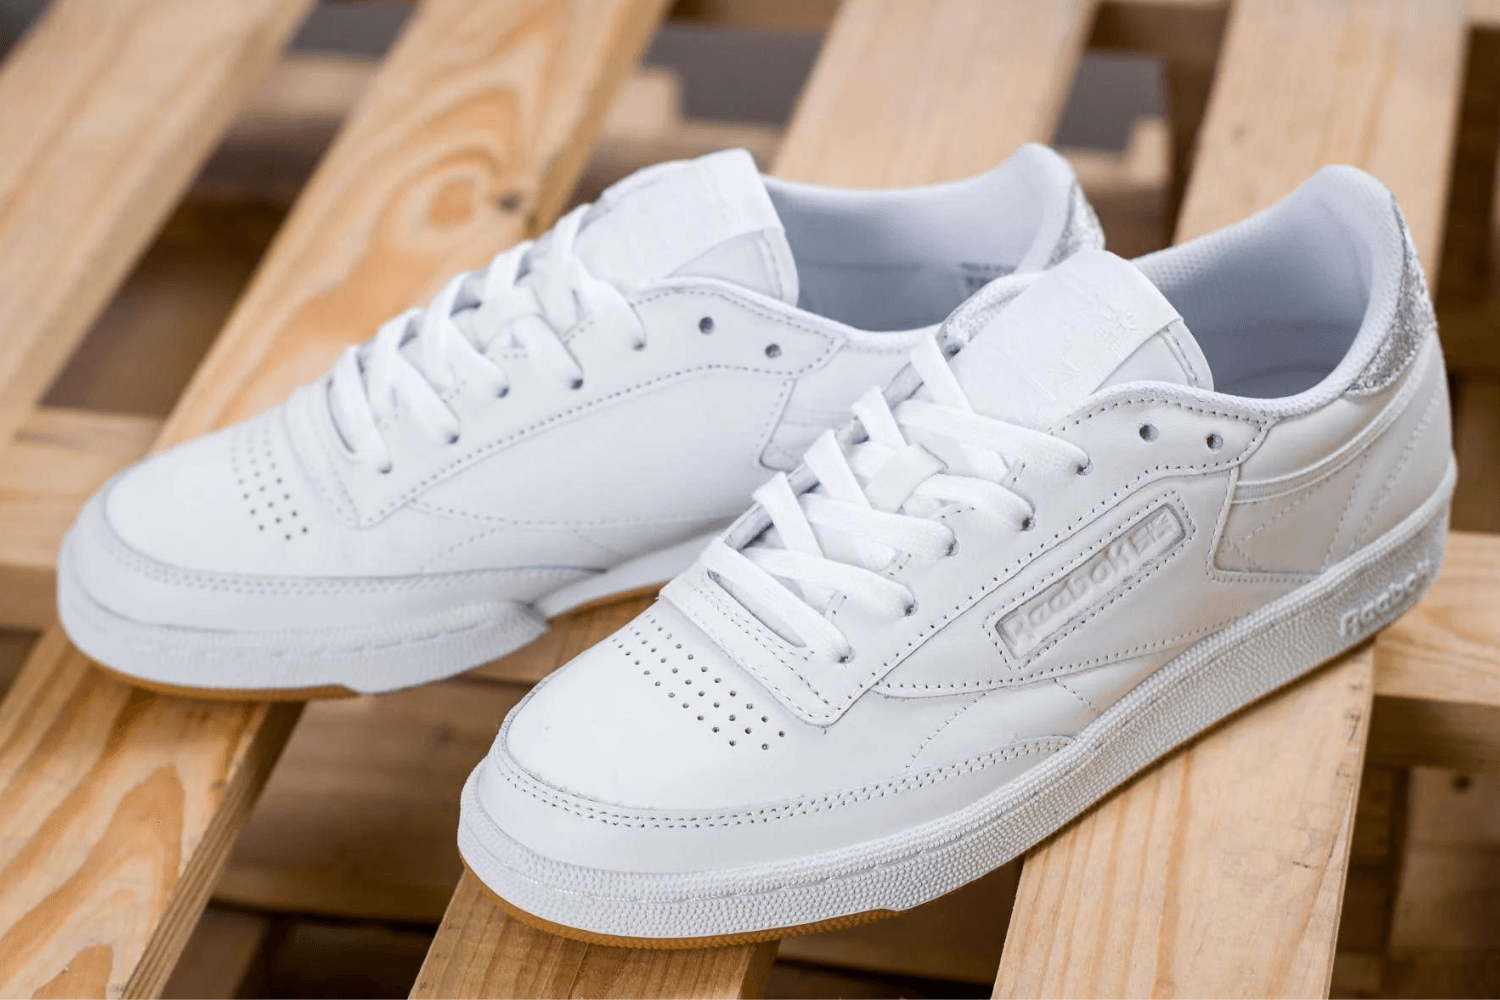 Exclusive discount on white sneakers at Footshop